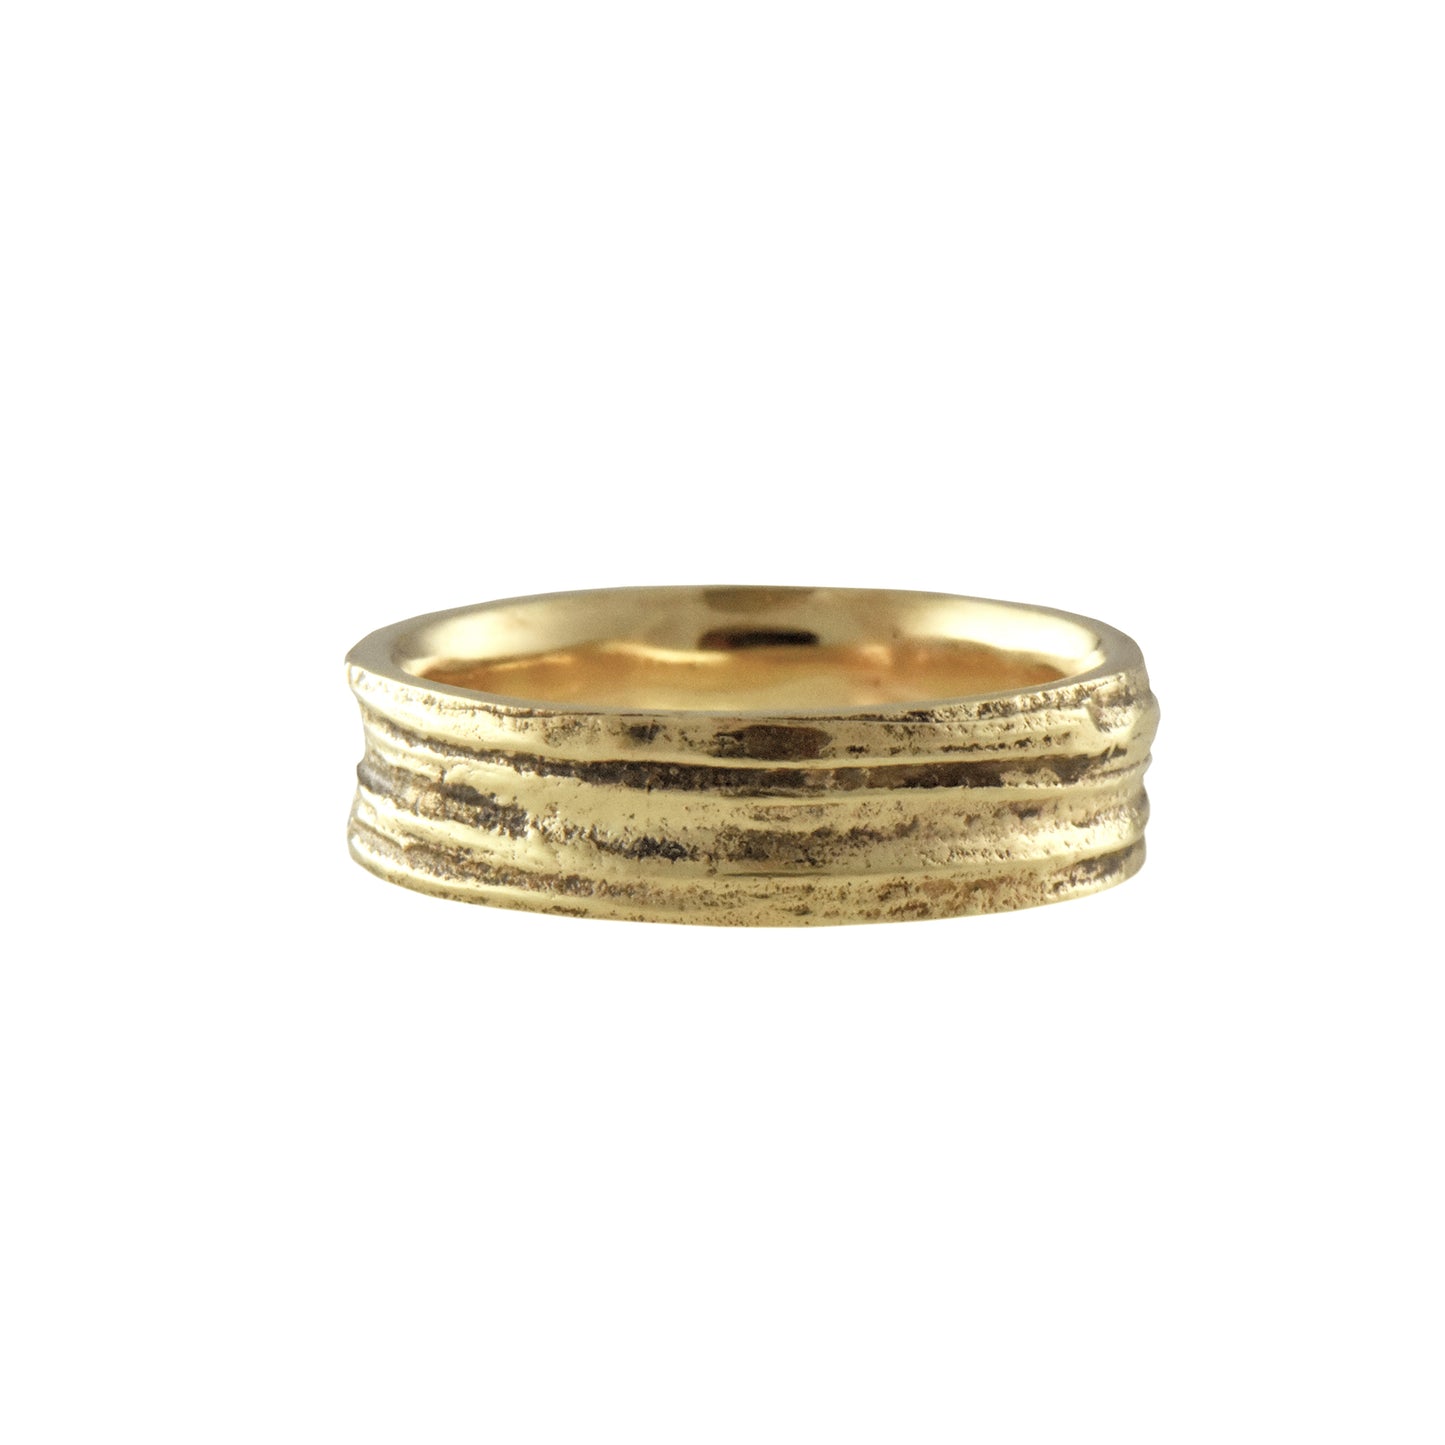 Wide Lined Oak Ring in 14ct Gold